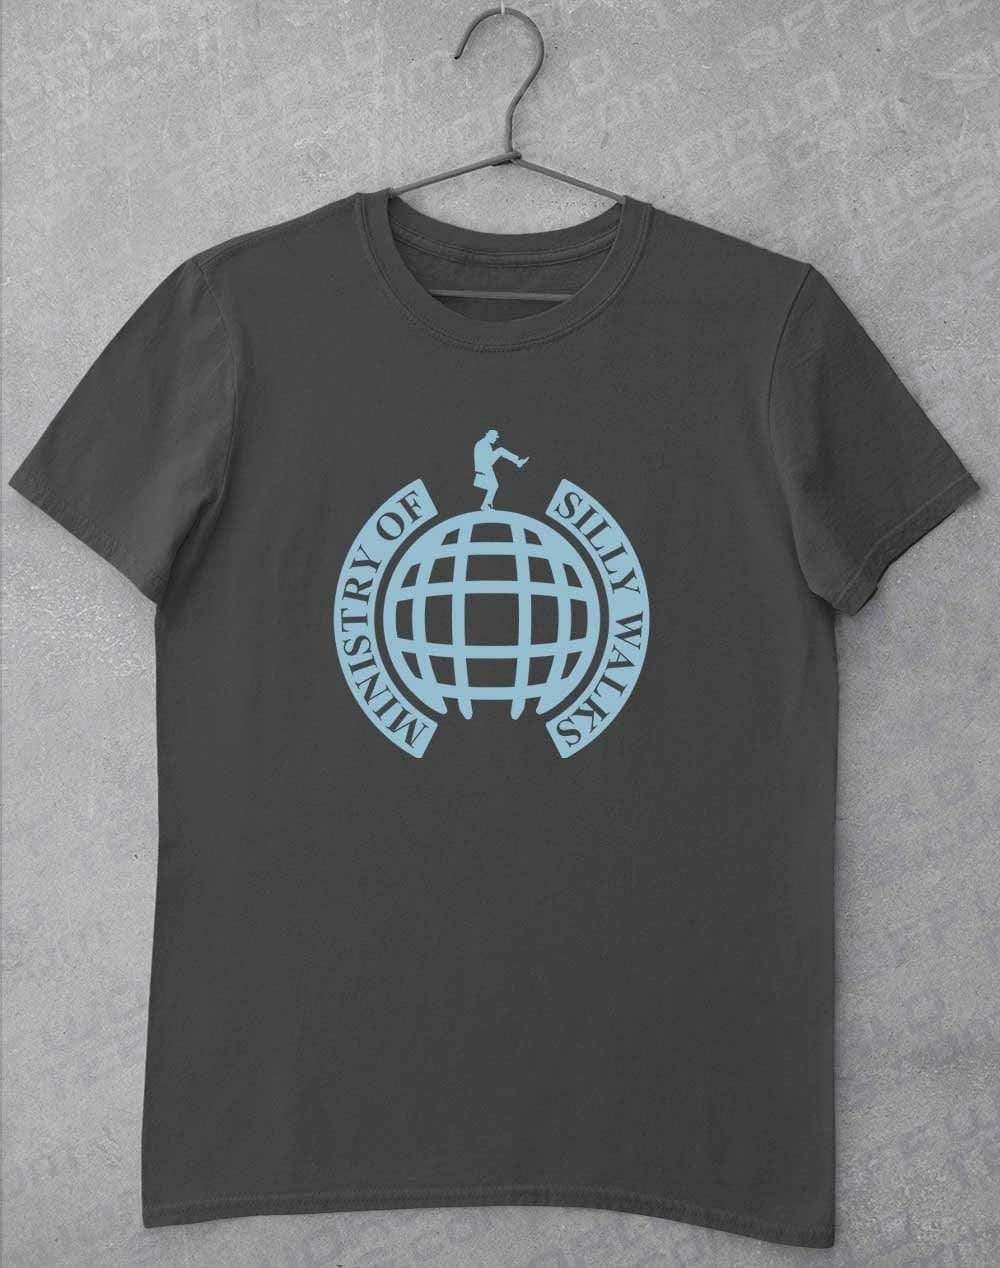 Ministry of Silly Walks T-Shirt S / Charcoal  - Off World Tees